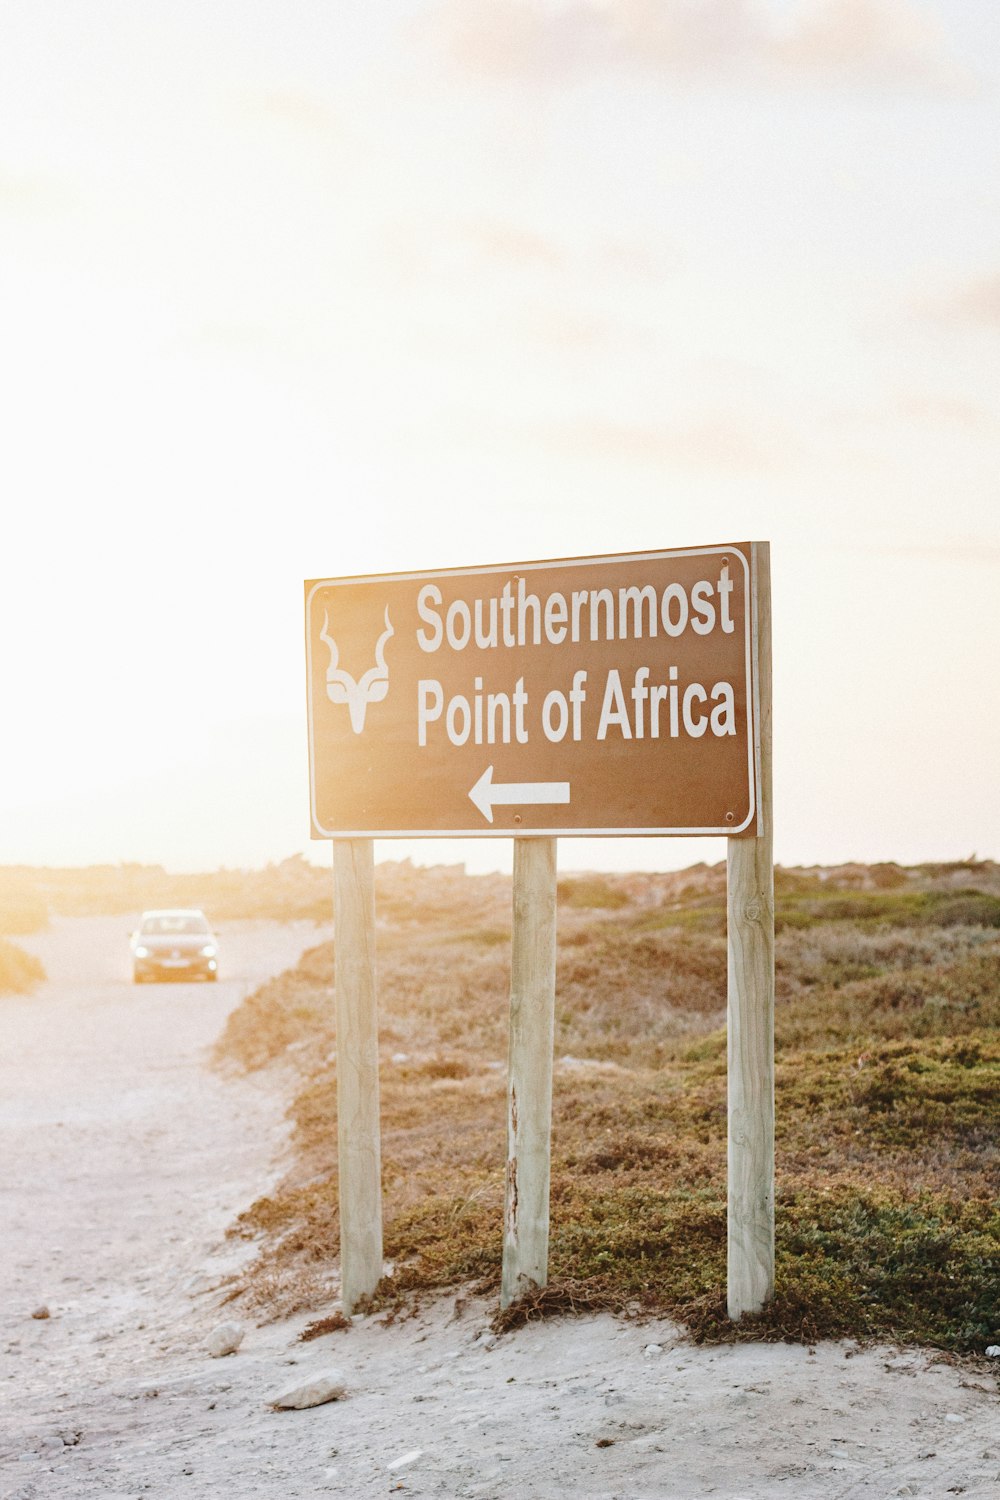 Southermost Point of Africa road sign and white vehicle on road during daytime